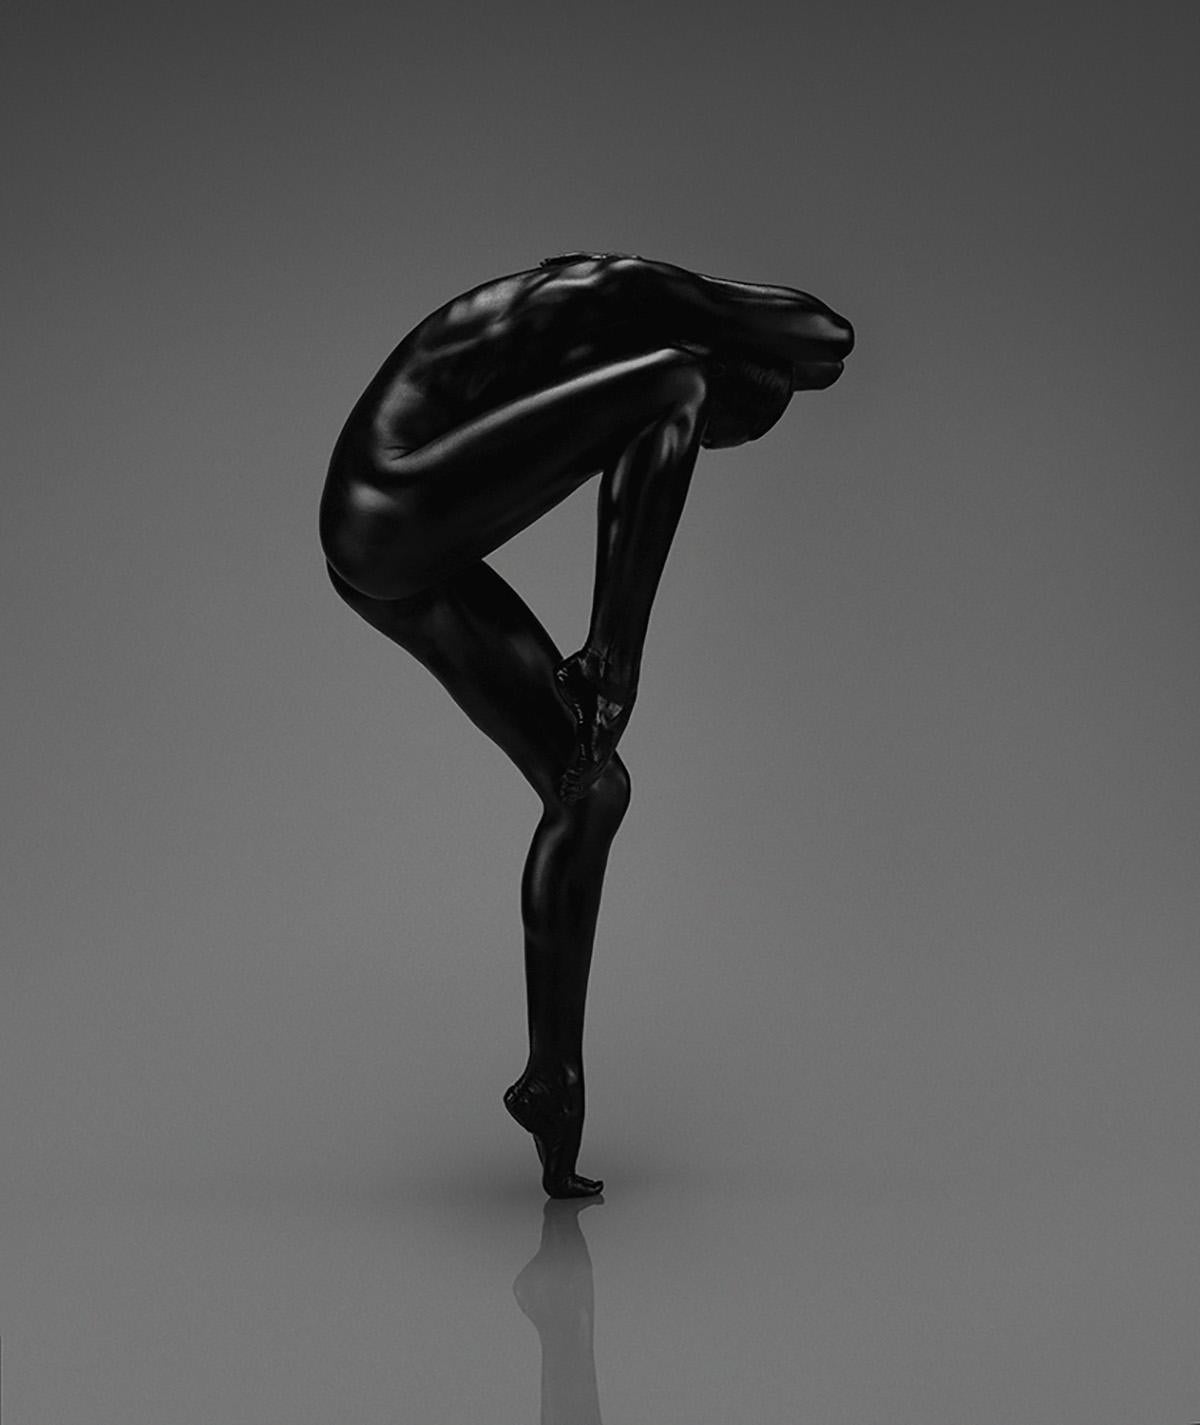 No title (No 10) Photography Edition of 28 36" x 29" in by Yevgeniy Repiashenko

Year photo was taken: 2015

This artwork is part of "Spirit" series.
The picture shows a frozen movement of professional ballerina. 
Special glazed black makeup is put